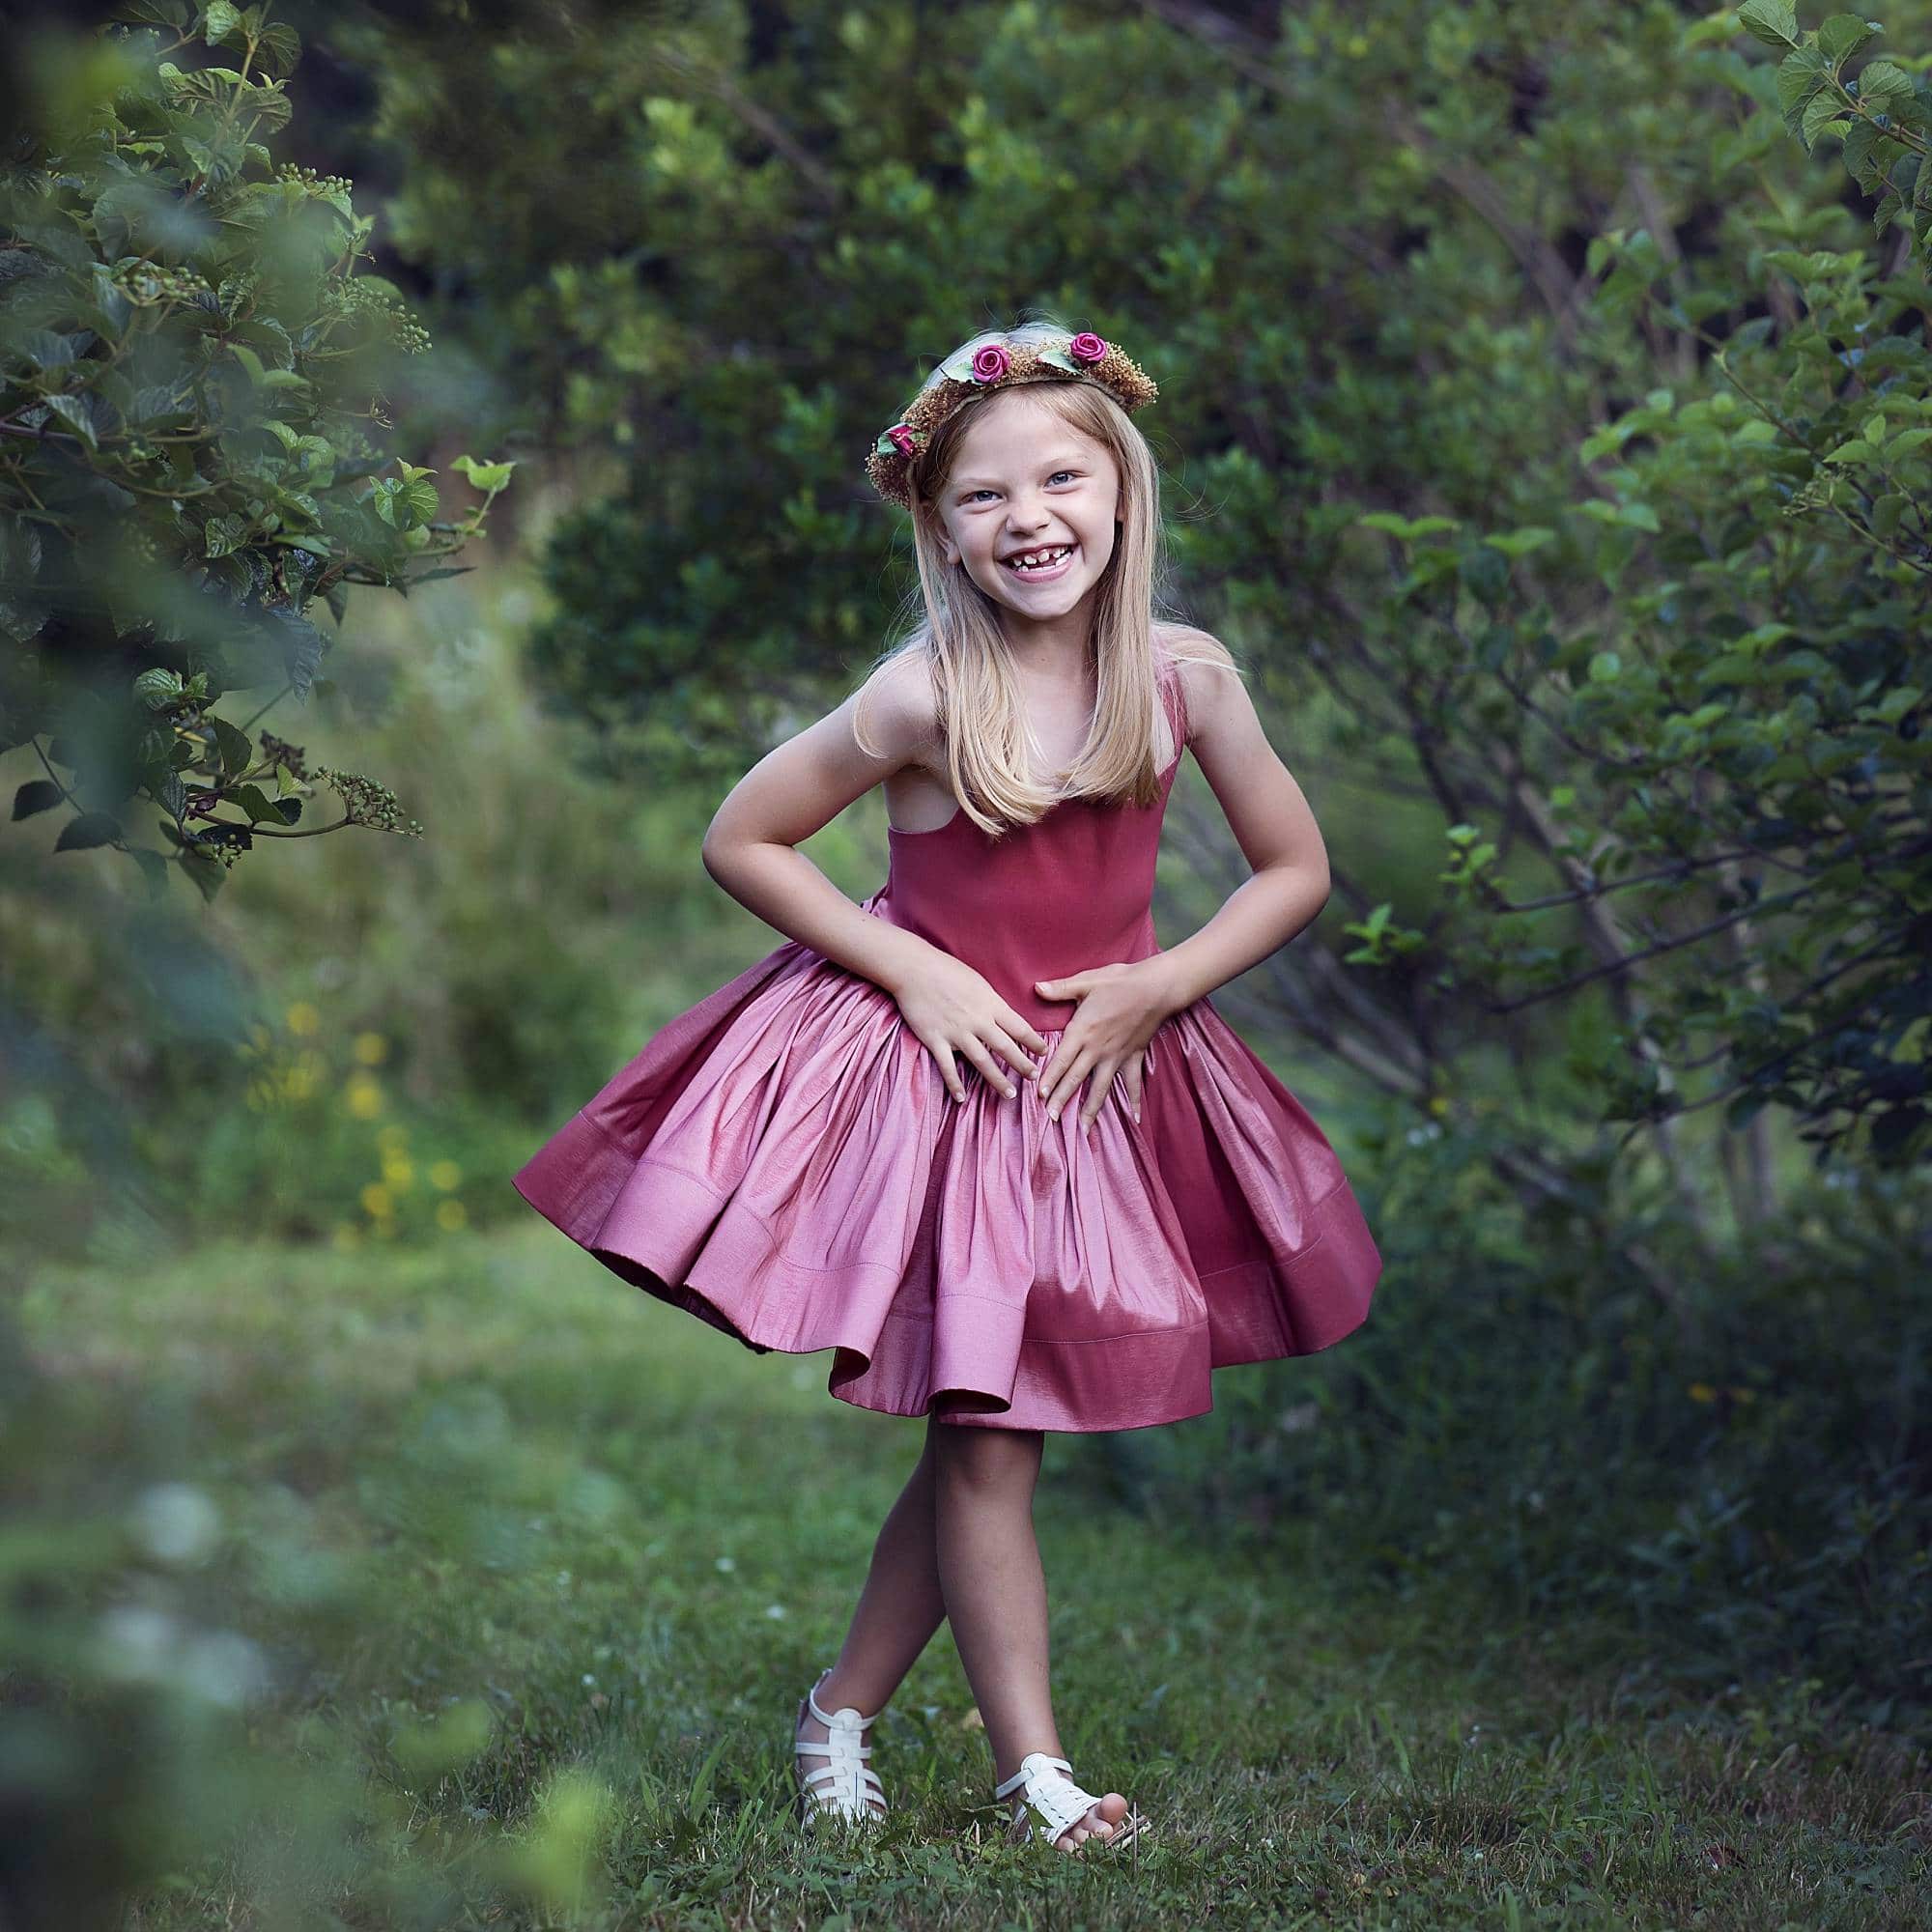 little girl wearing a pink short tutu dress and flower crown. she's smiling while standing near some tall bushes.